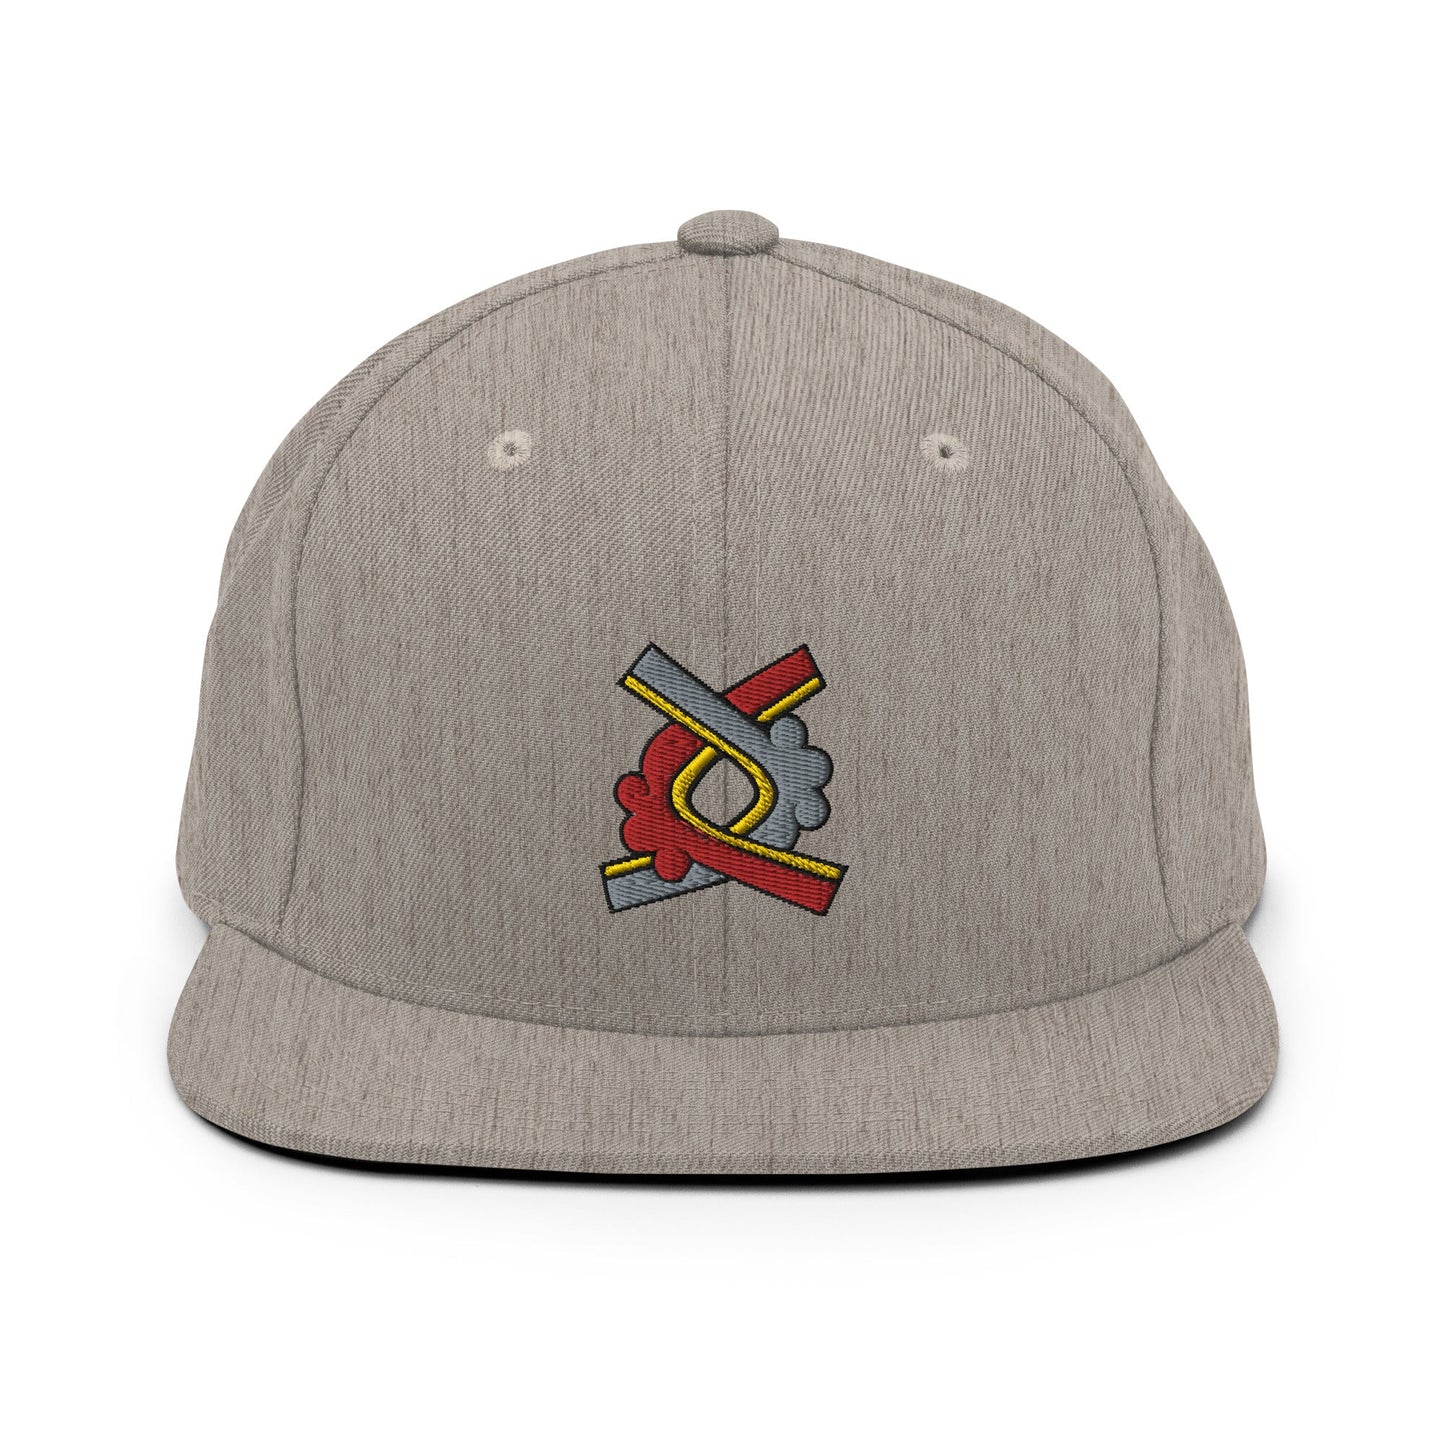 Ollin (Natural Colorway) - Embroidered Snapback Hat